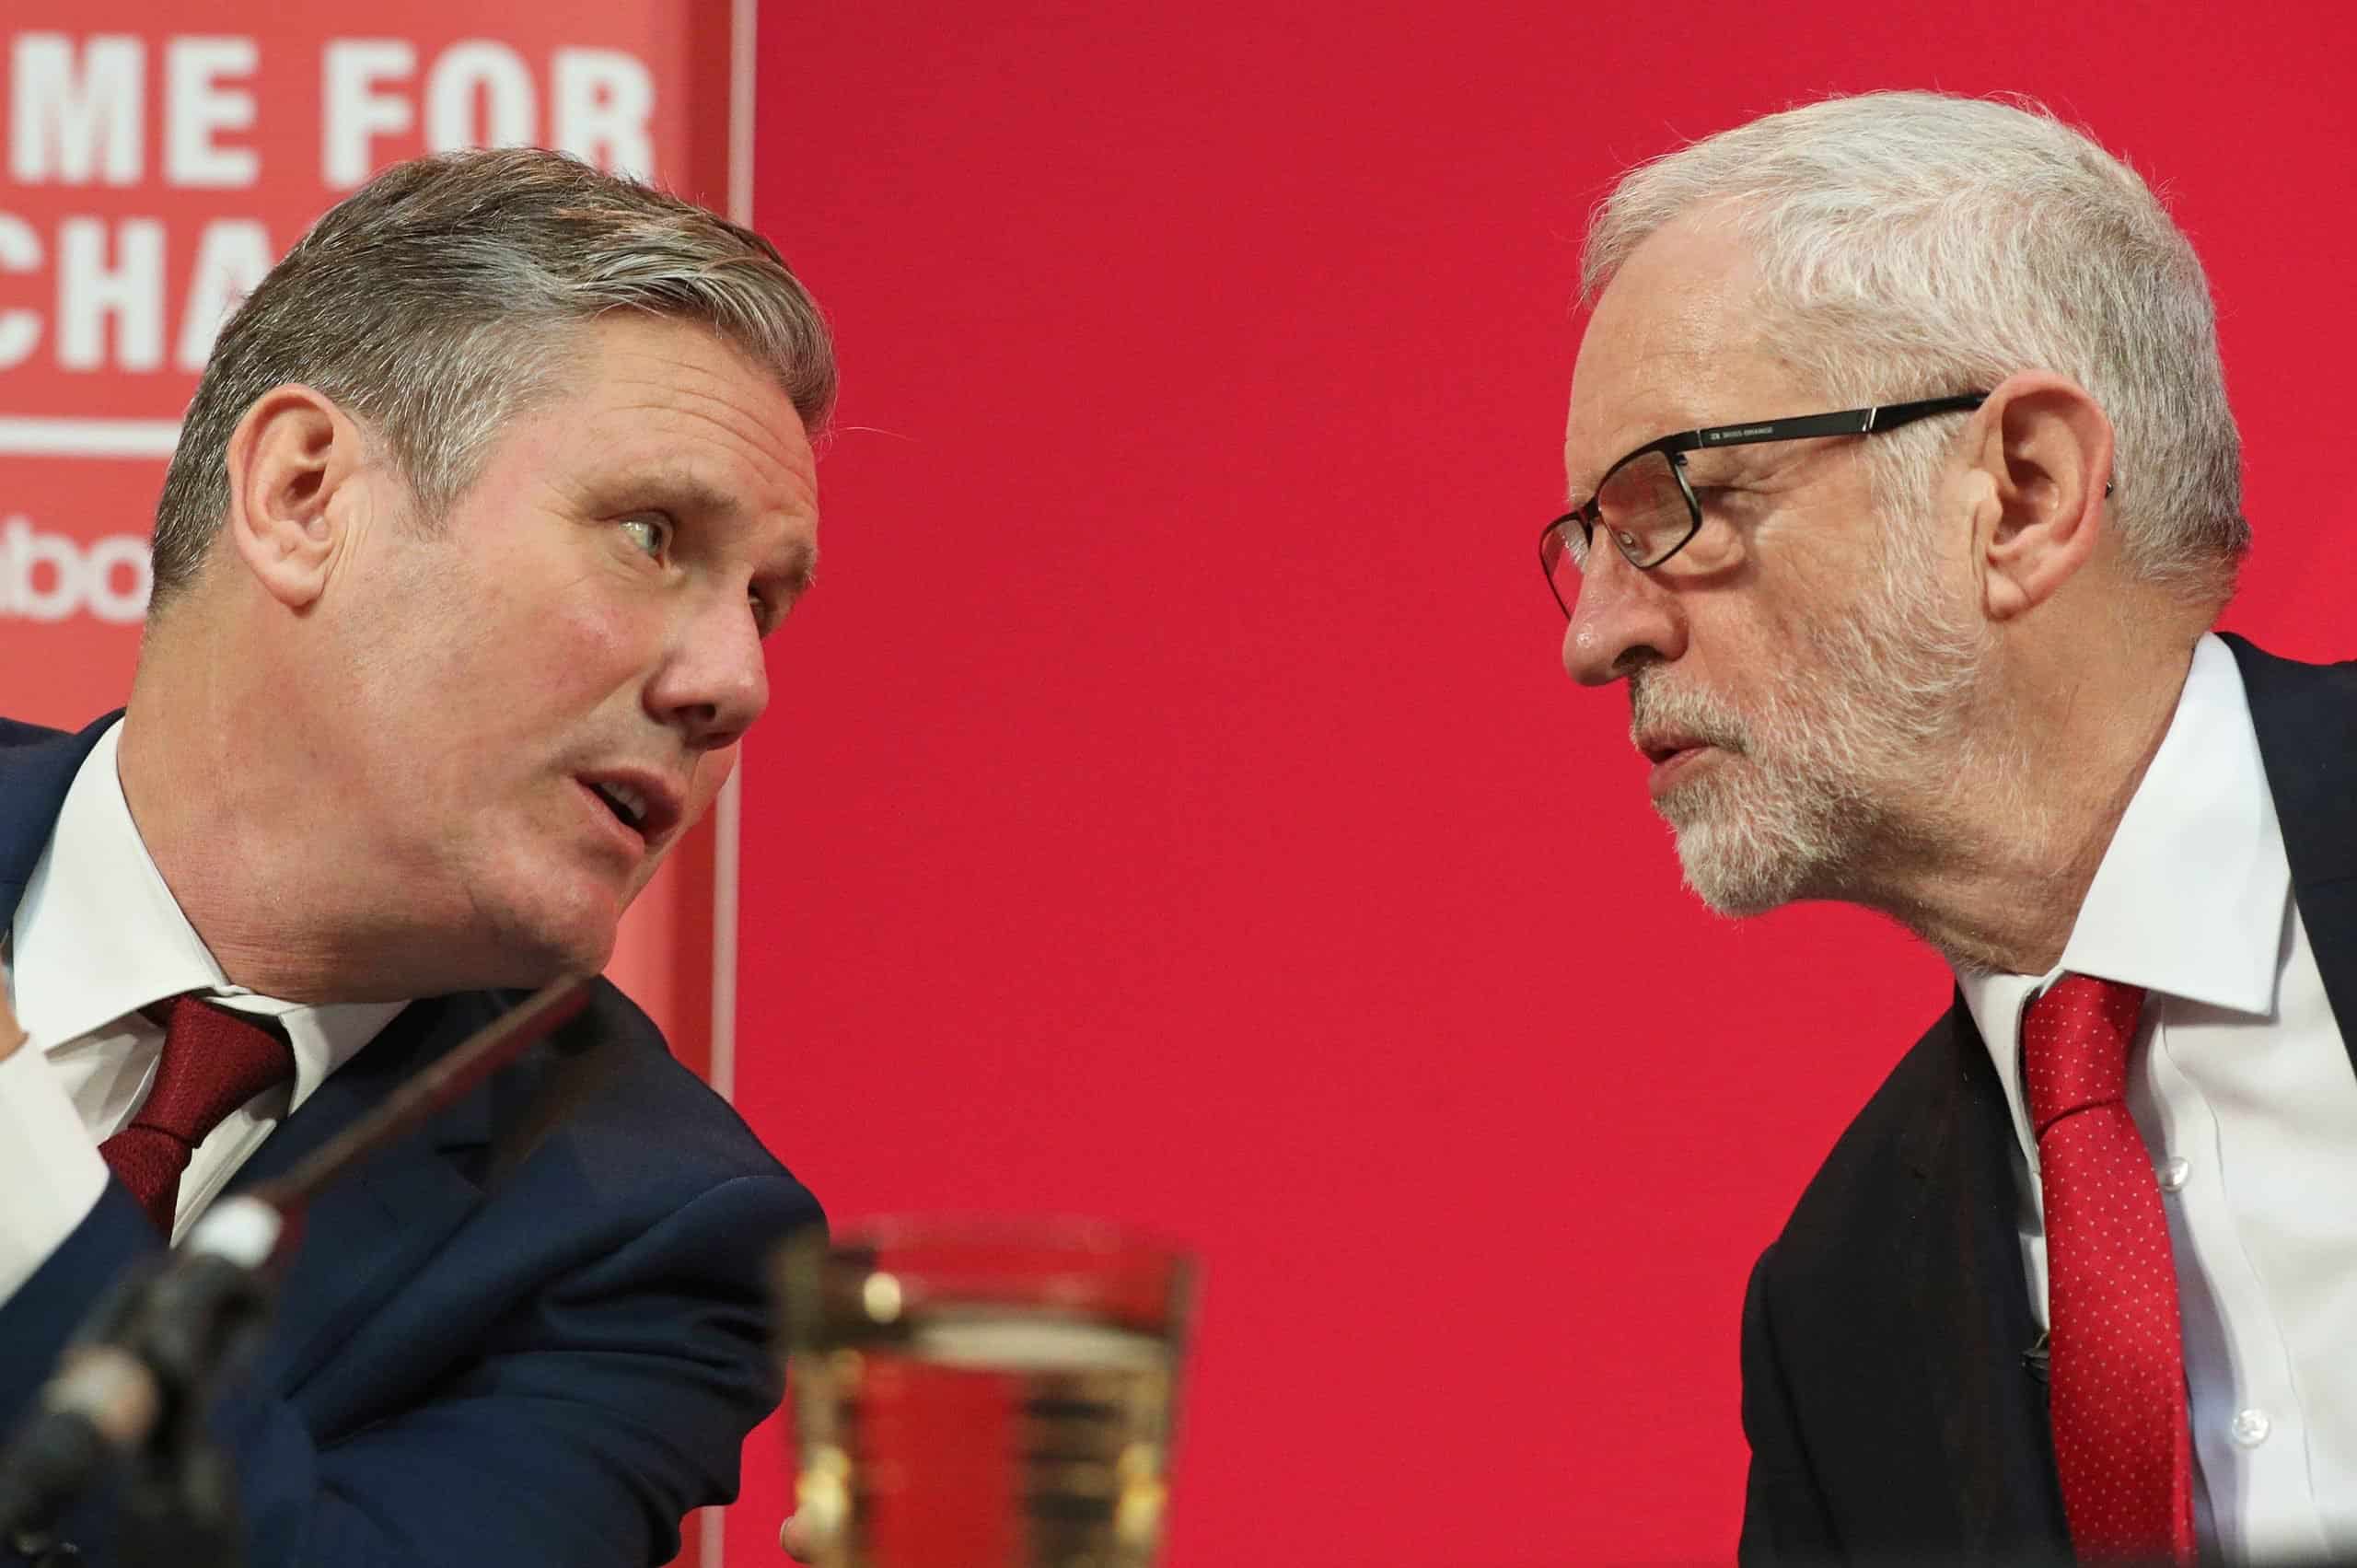 Eight in ten Labour voters say Corbyn should be allowed back into the Labour Party